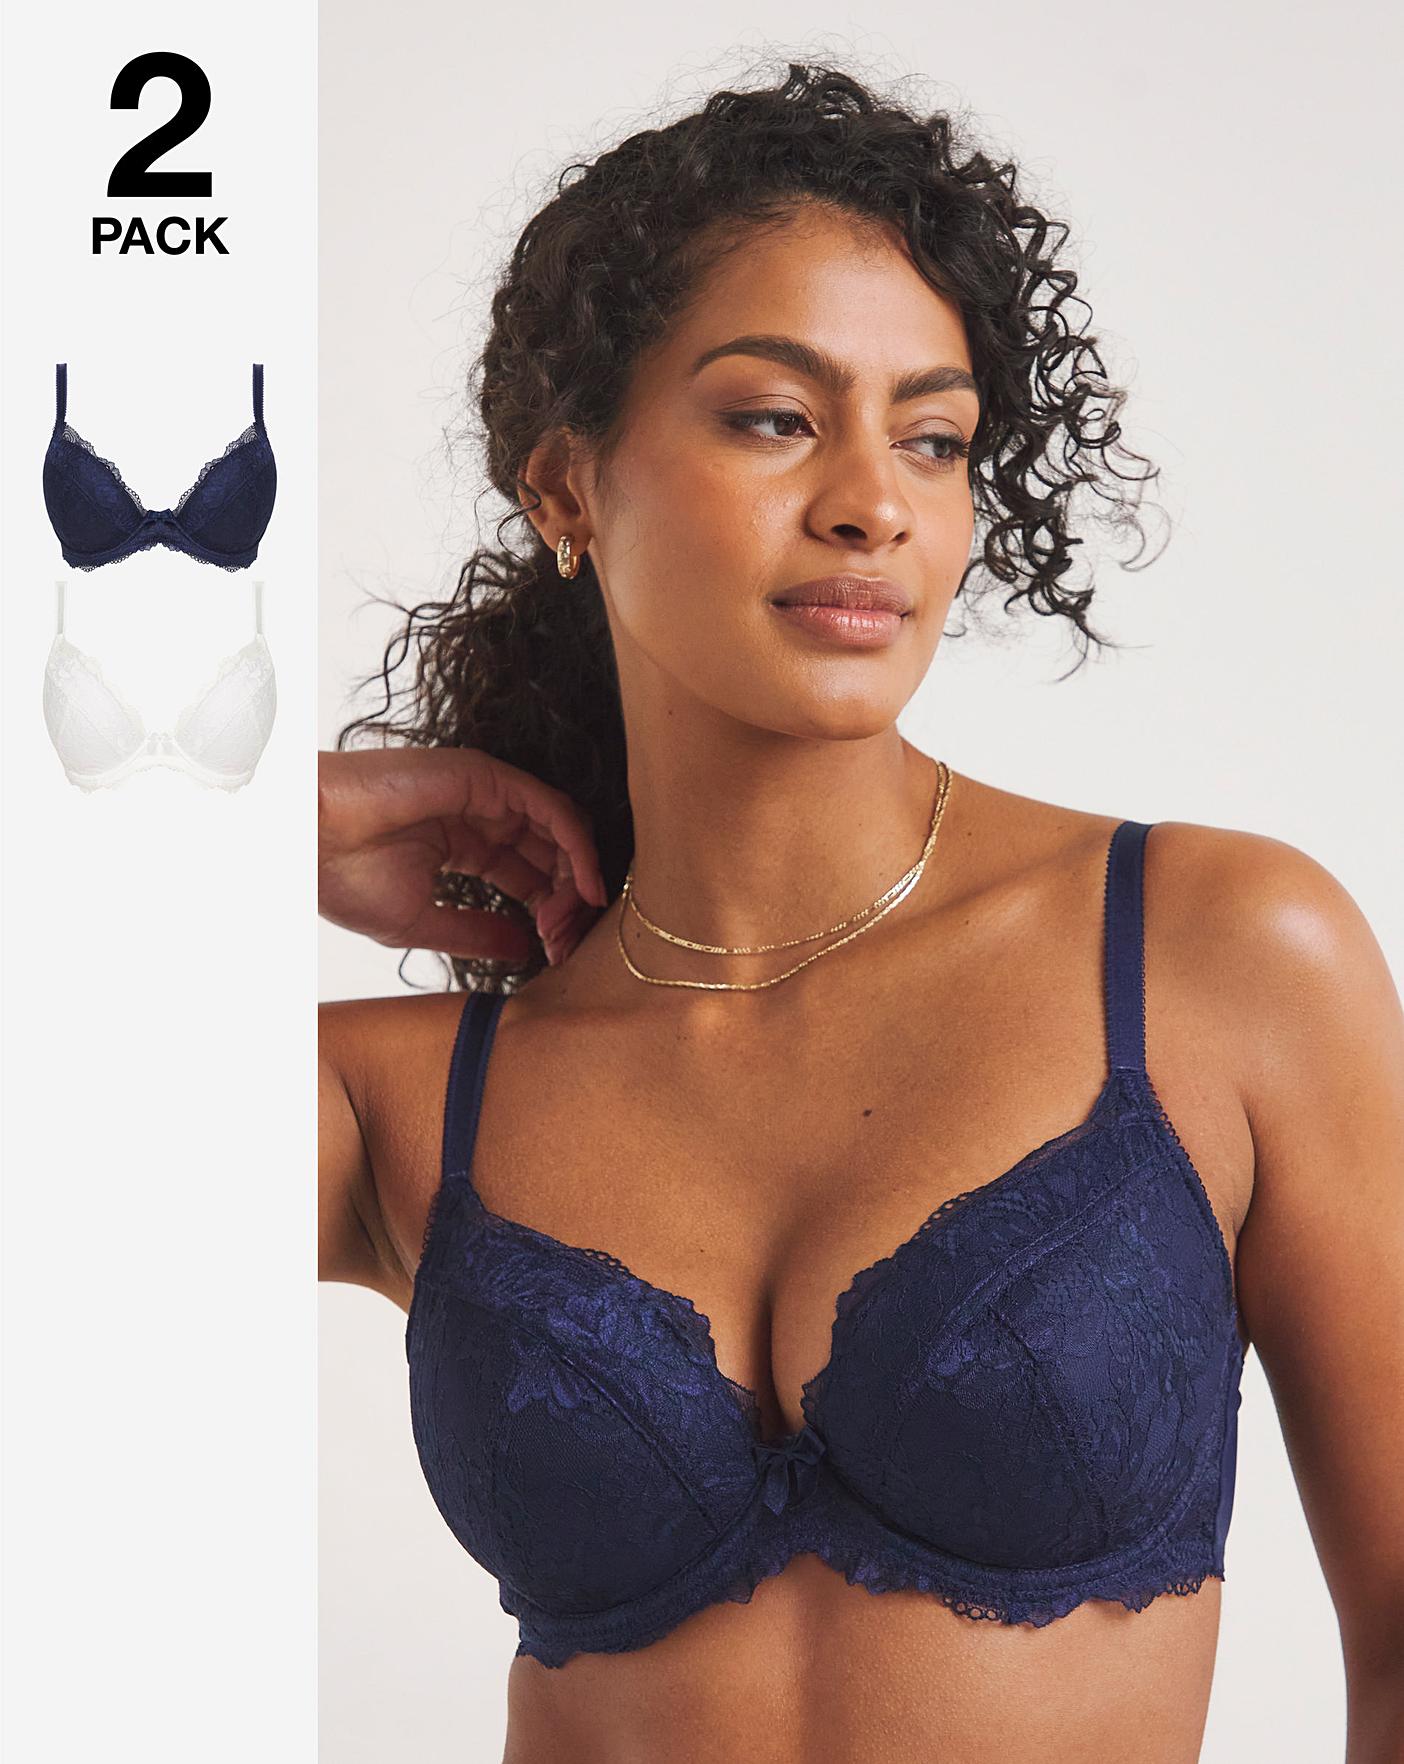 2 in 1 PLUNGE BRA SET🔥LIFT AND ENHANCE THE CLEAVAGE BRAND